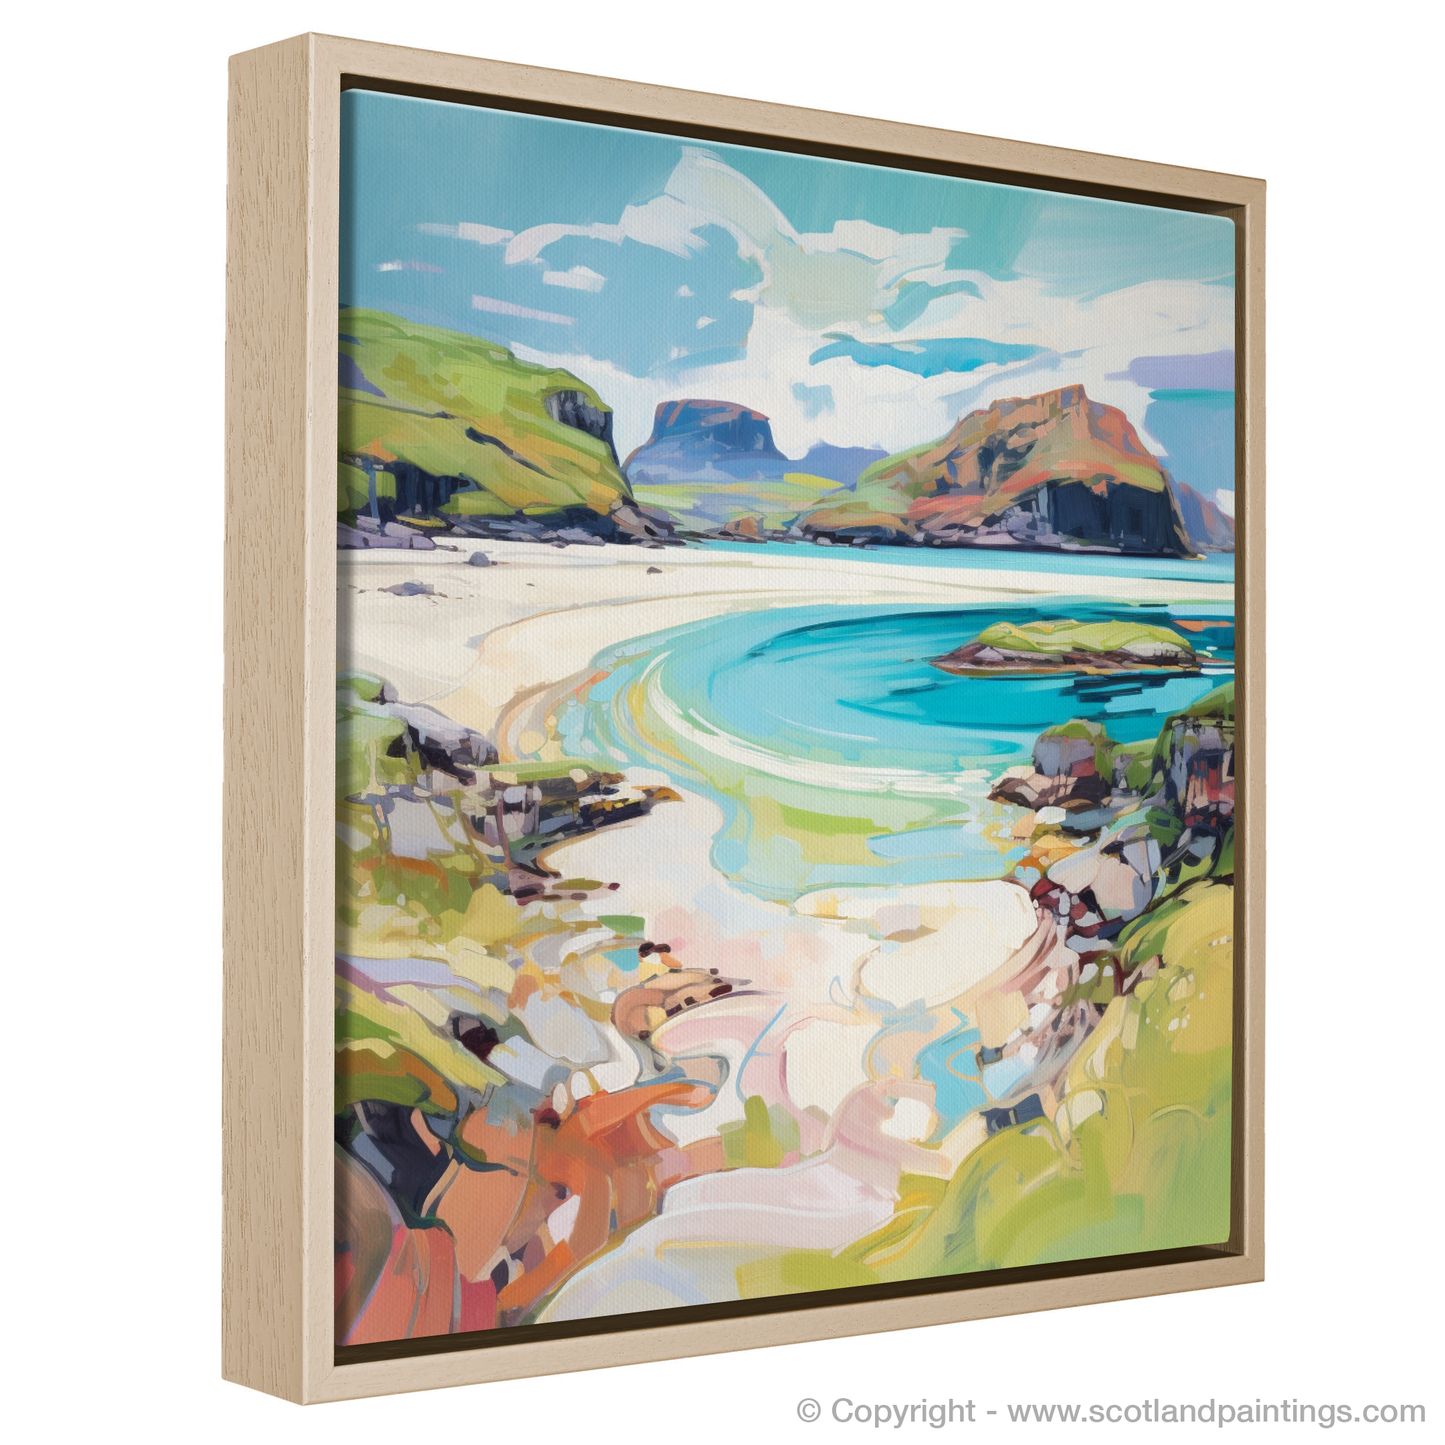 Calgary Bay Summer Vibrance: A Modern Ode to the Isle of Mull